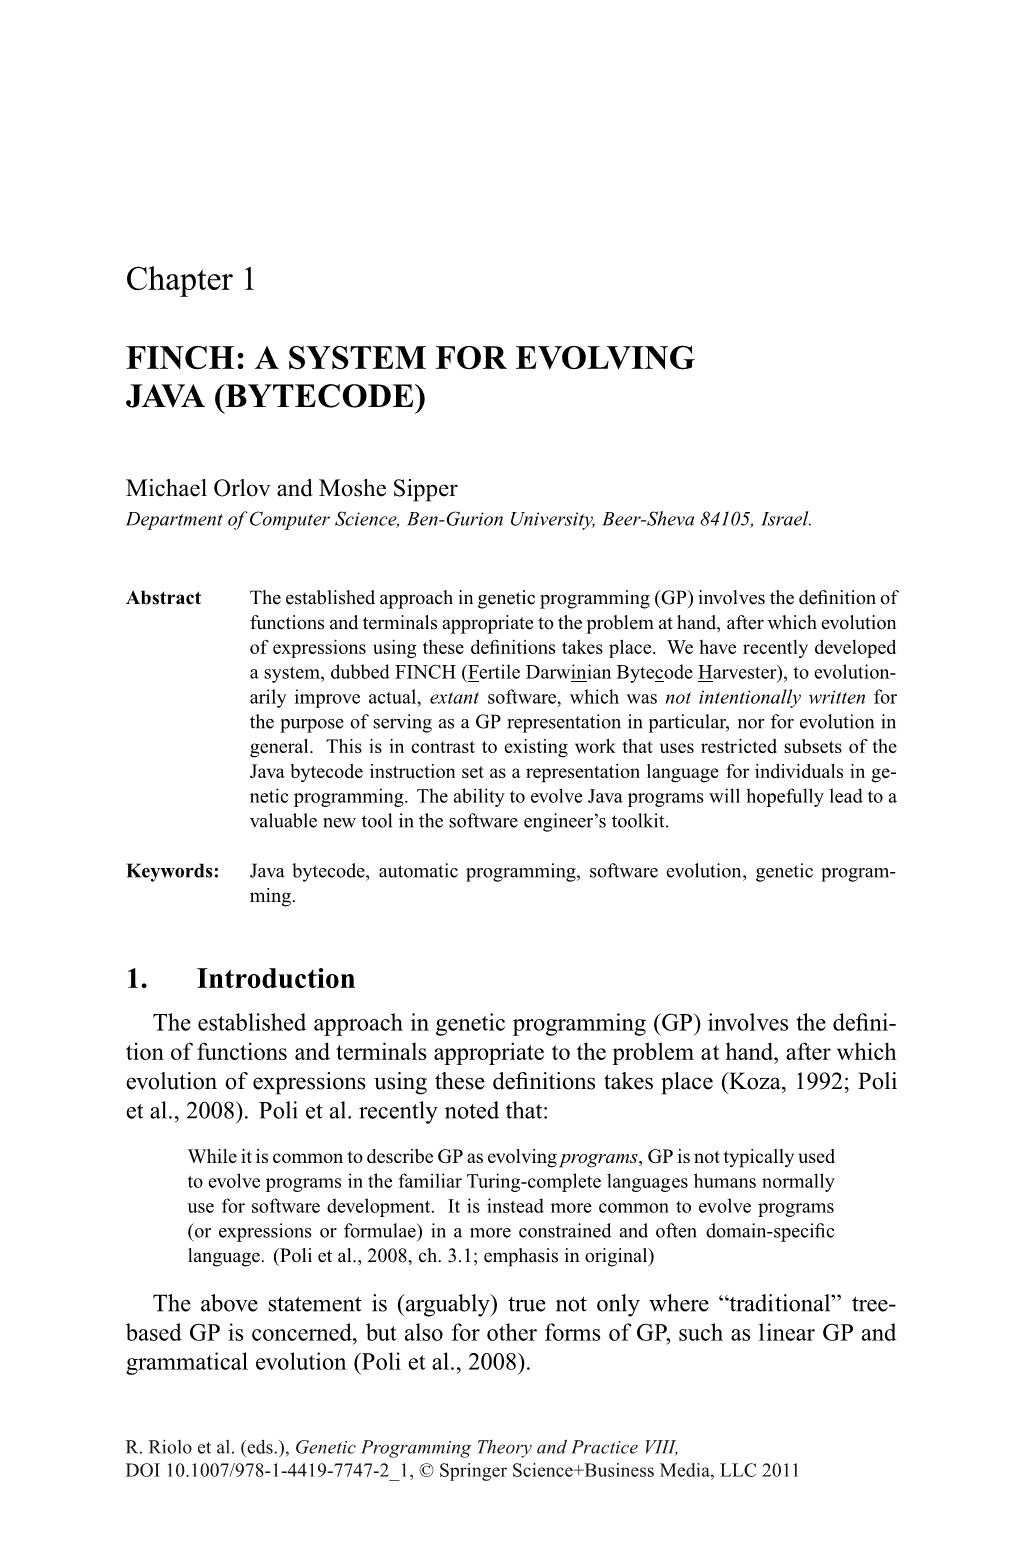 Chapter 1 FINCH: a SYSTEM for EVOLVING JAVA (BYTECODE)